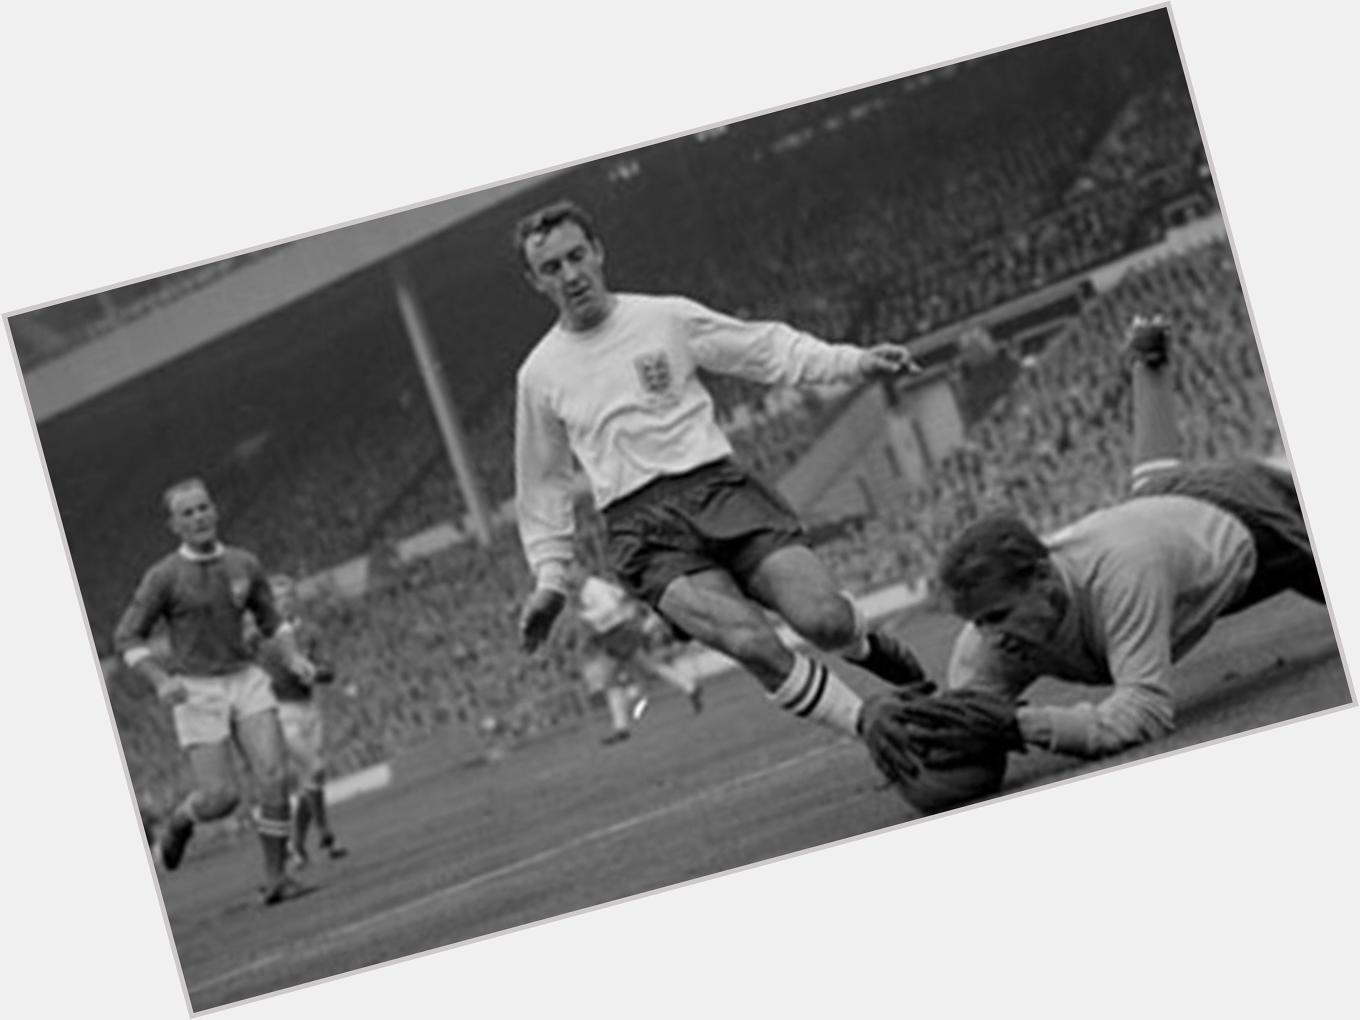 Happy Birthday Jimmy Greaves, former England and Tottenham\s greatest striker celebrates his 75th birthday today. 